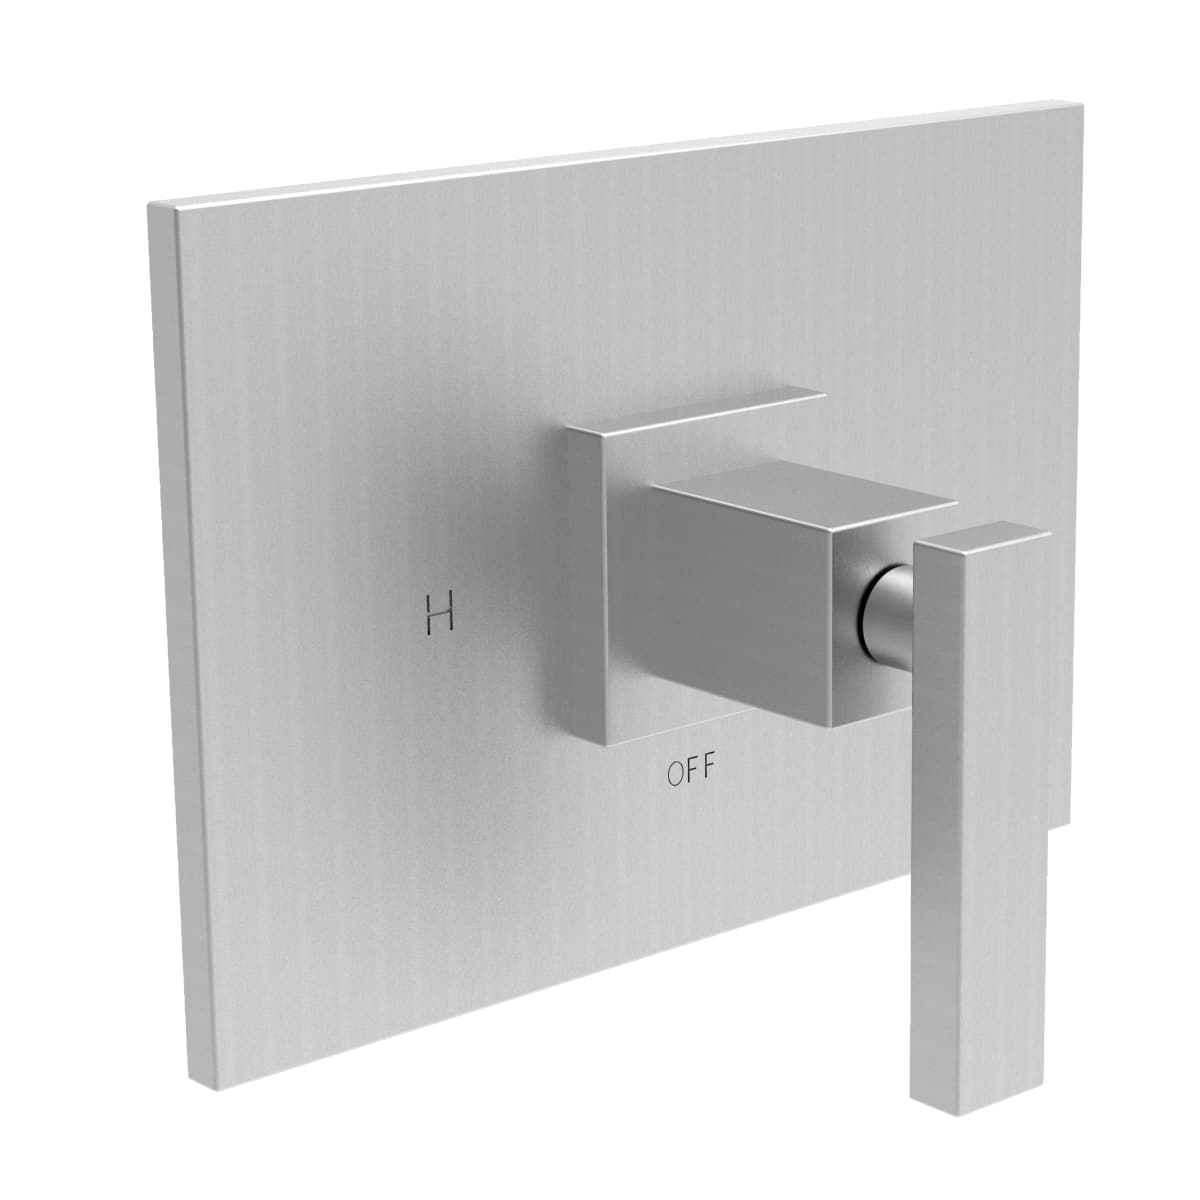 4H3144BPS04 by Newport Brass - Satin Brass - PVD Balanced Pressure Shower  Trim Plate with Handle. Less showerhead, arm and flange.